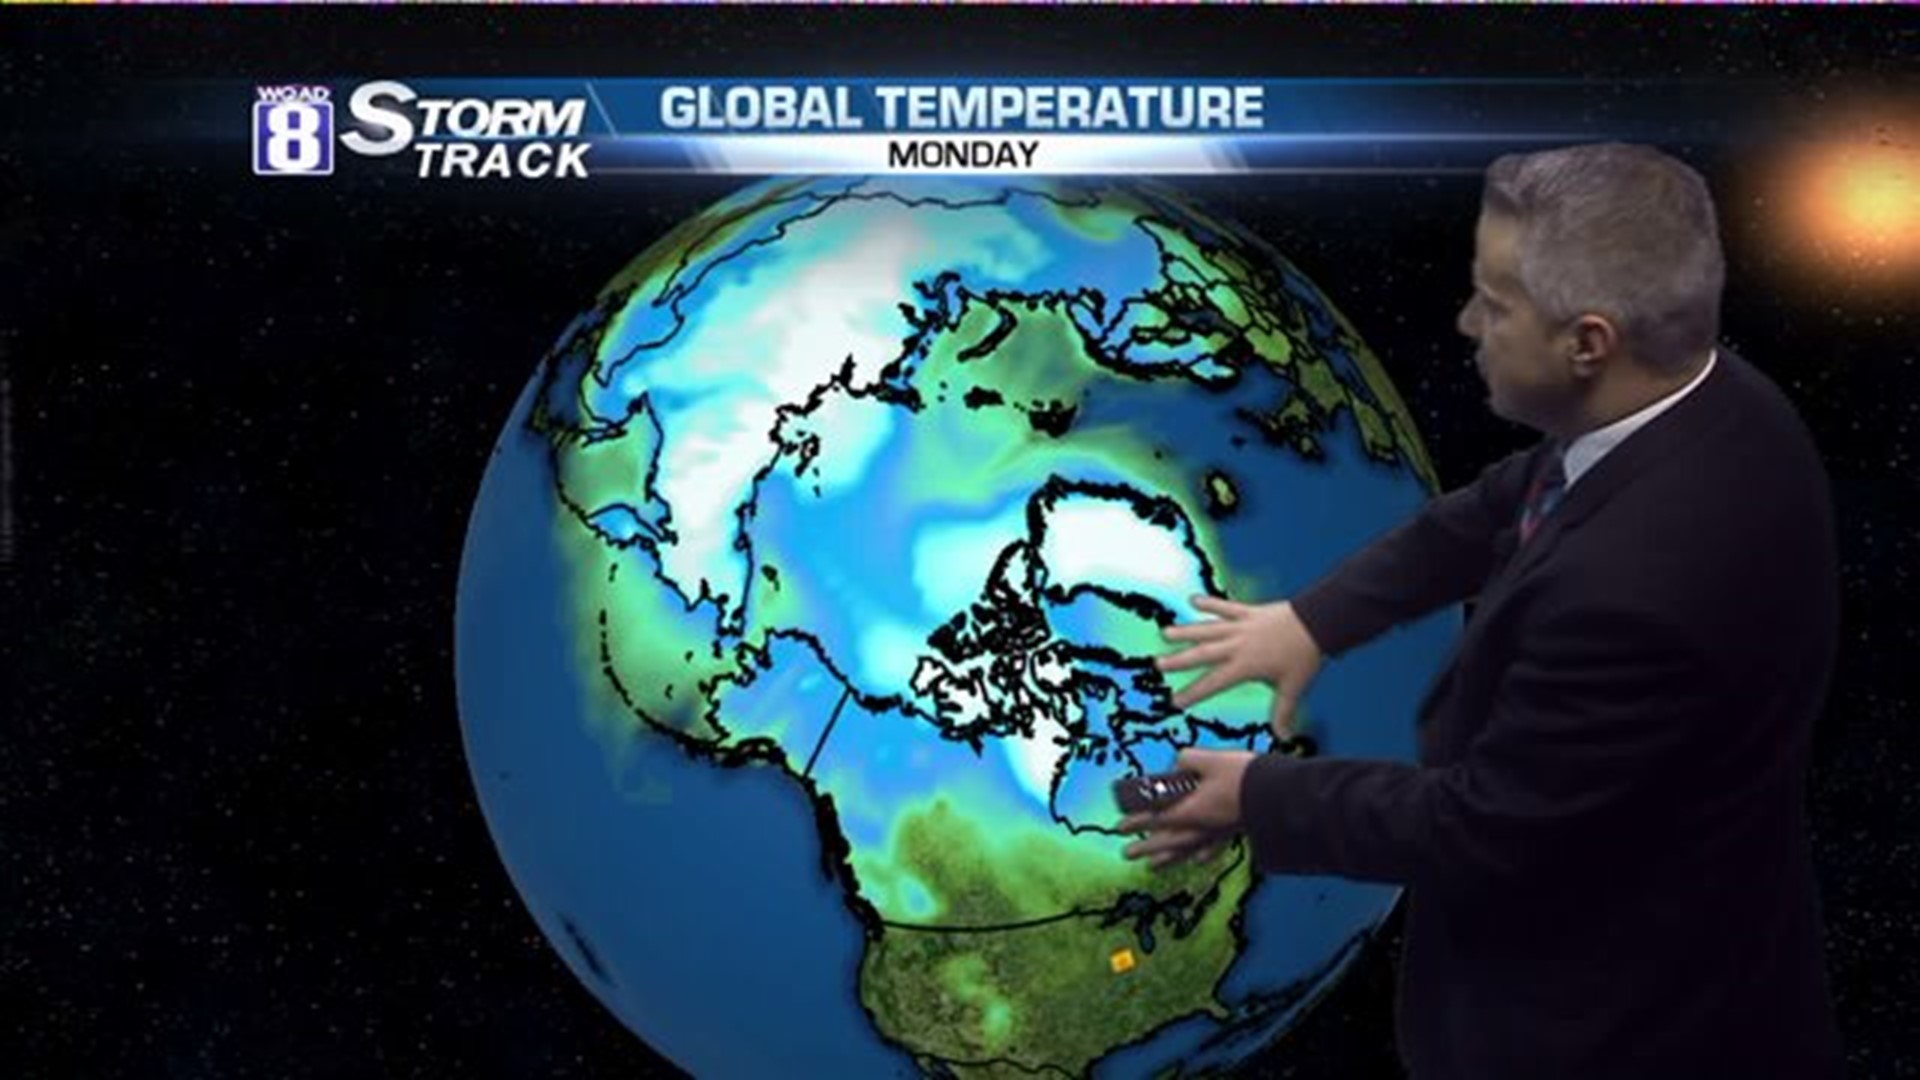 Eric explains why the coldest air is not over the North Pole